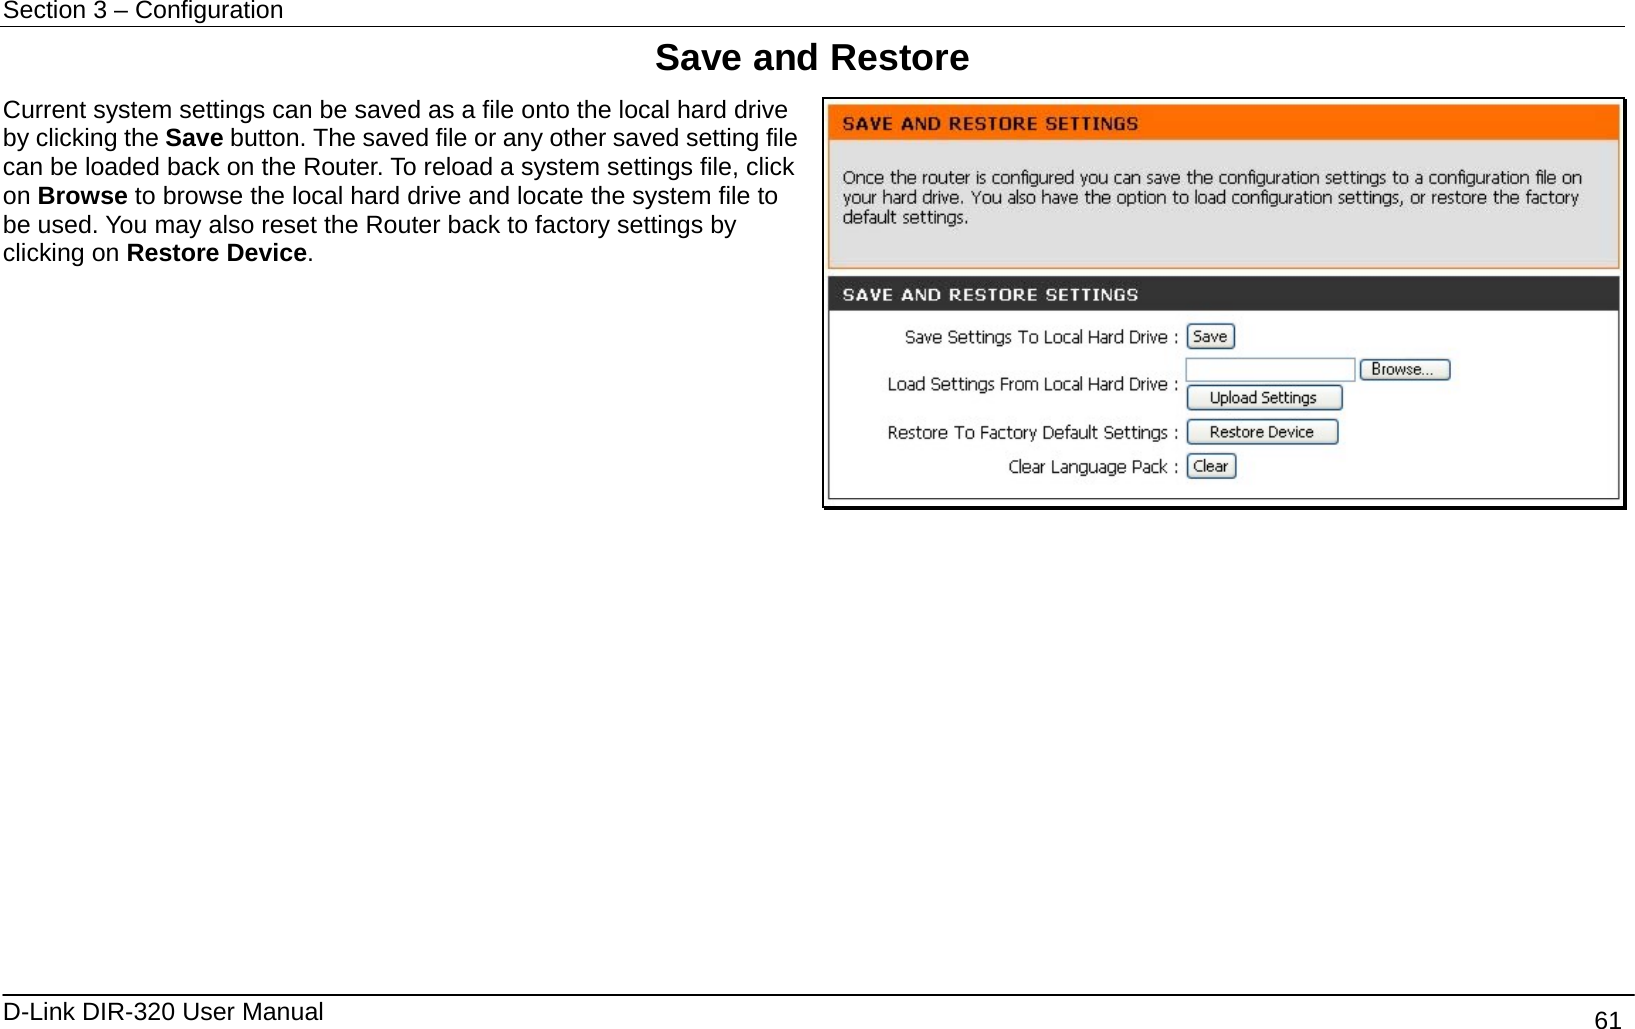 Section 3 – Configuration   D-Link DIR-320 User Manual                                       61 Save and Restore Current system settings can be saved as a file onto the local hard drive by clicking the Save button. The saved file or any other saved setting file can be loaded back on the Router. To reload a system settings file, click on Browse to browse the local hard drive and locate the system file to be used. You may also reset the Router back to factory settings by clicking on Restore Device.              